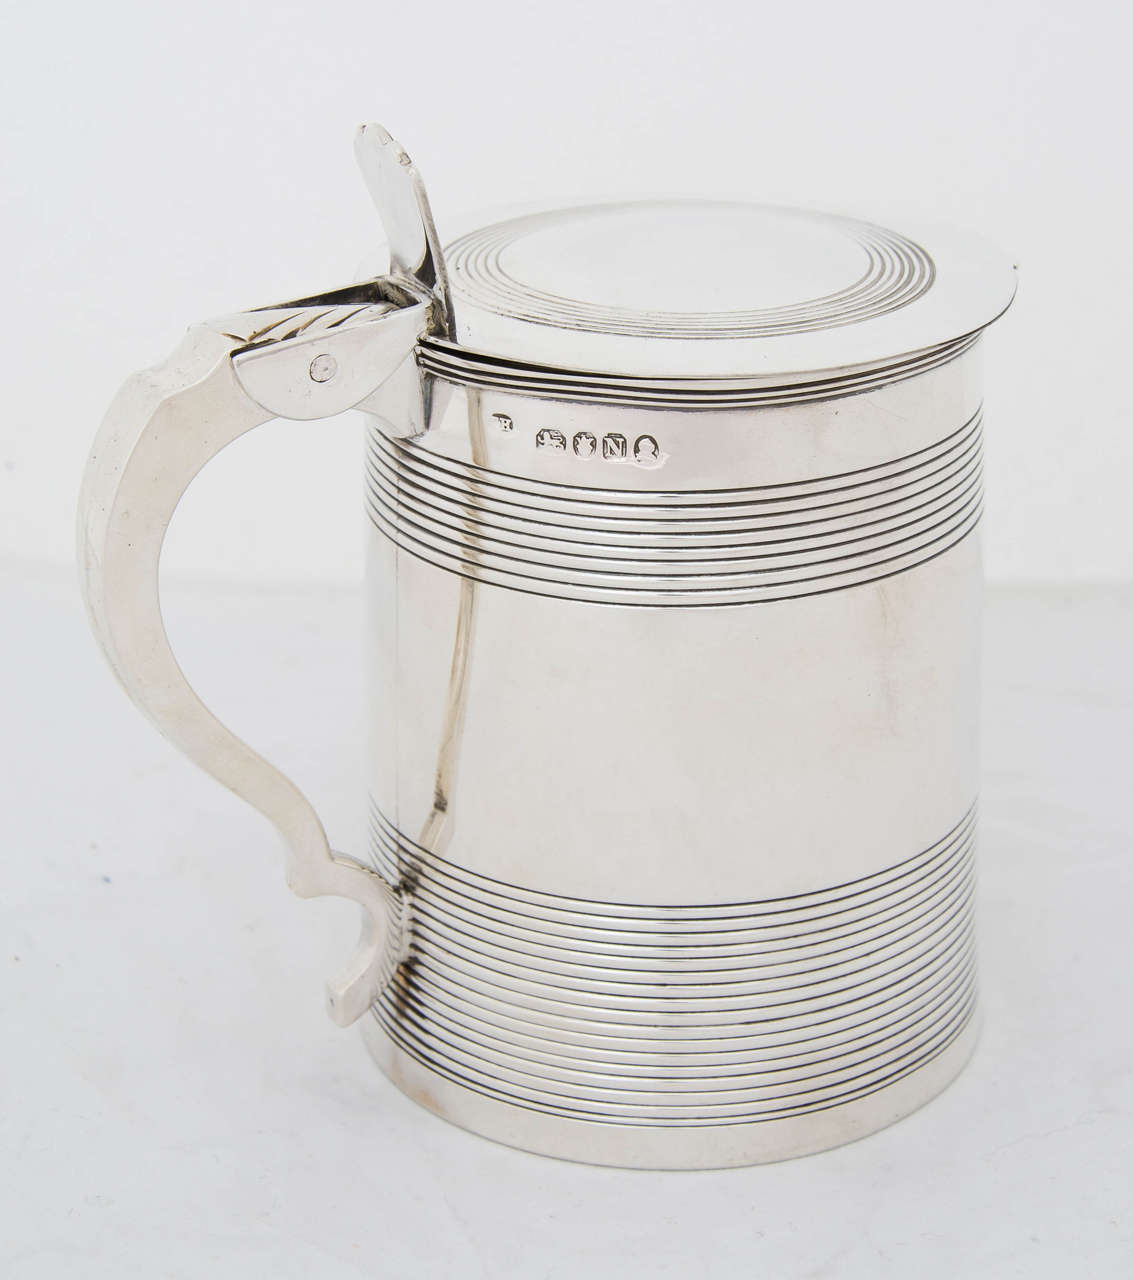 A George II English sterling silver tankard made in London 1808 by Thomas Hayter.
Height to top of thumb-piece is 5.5